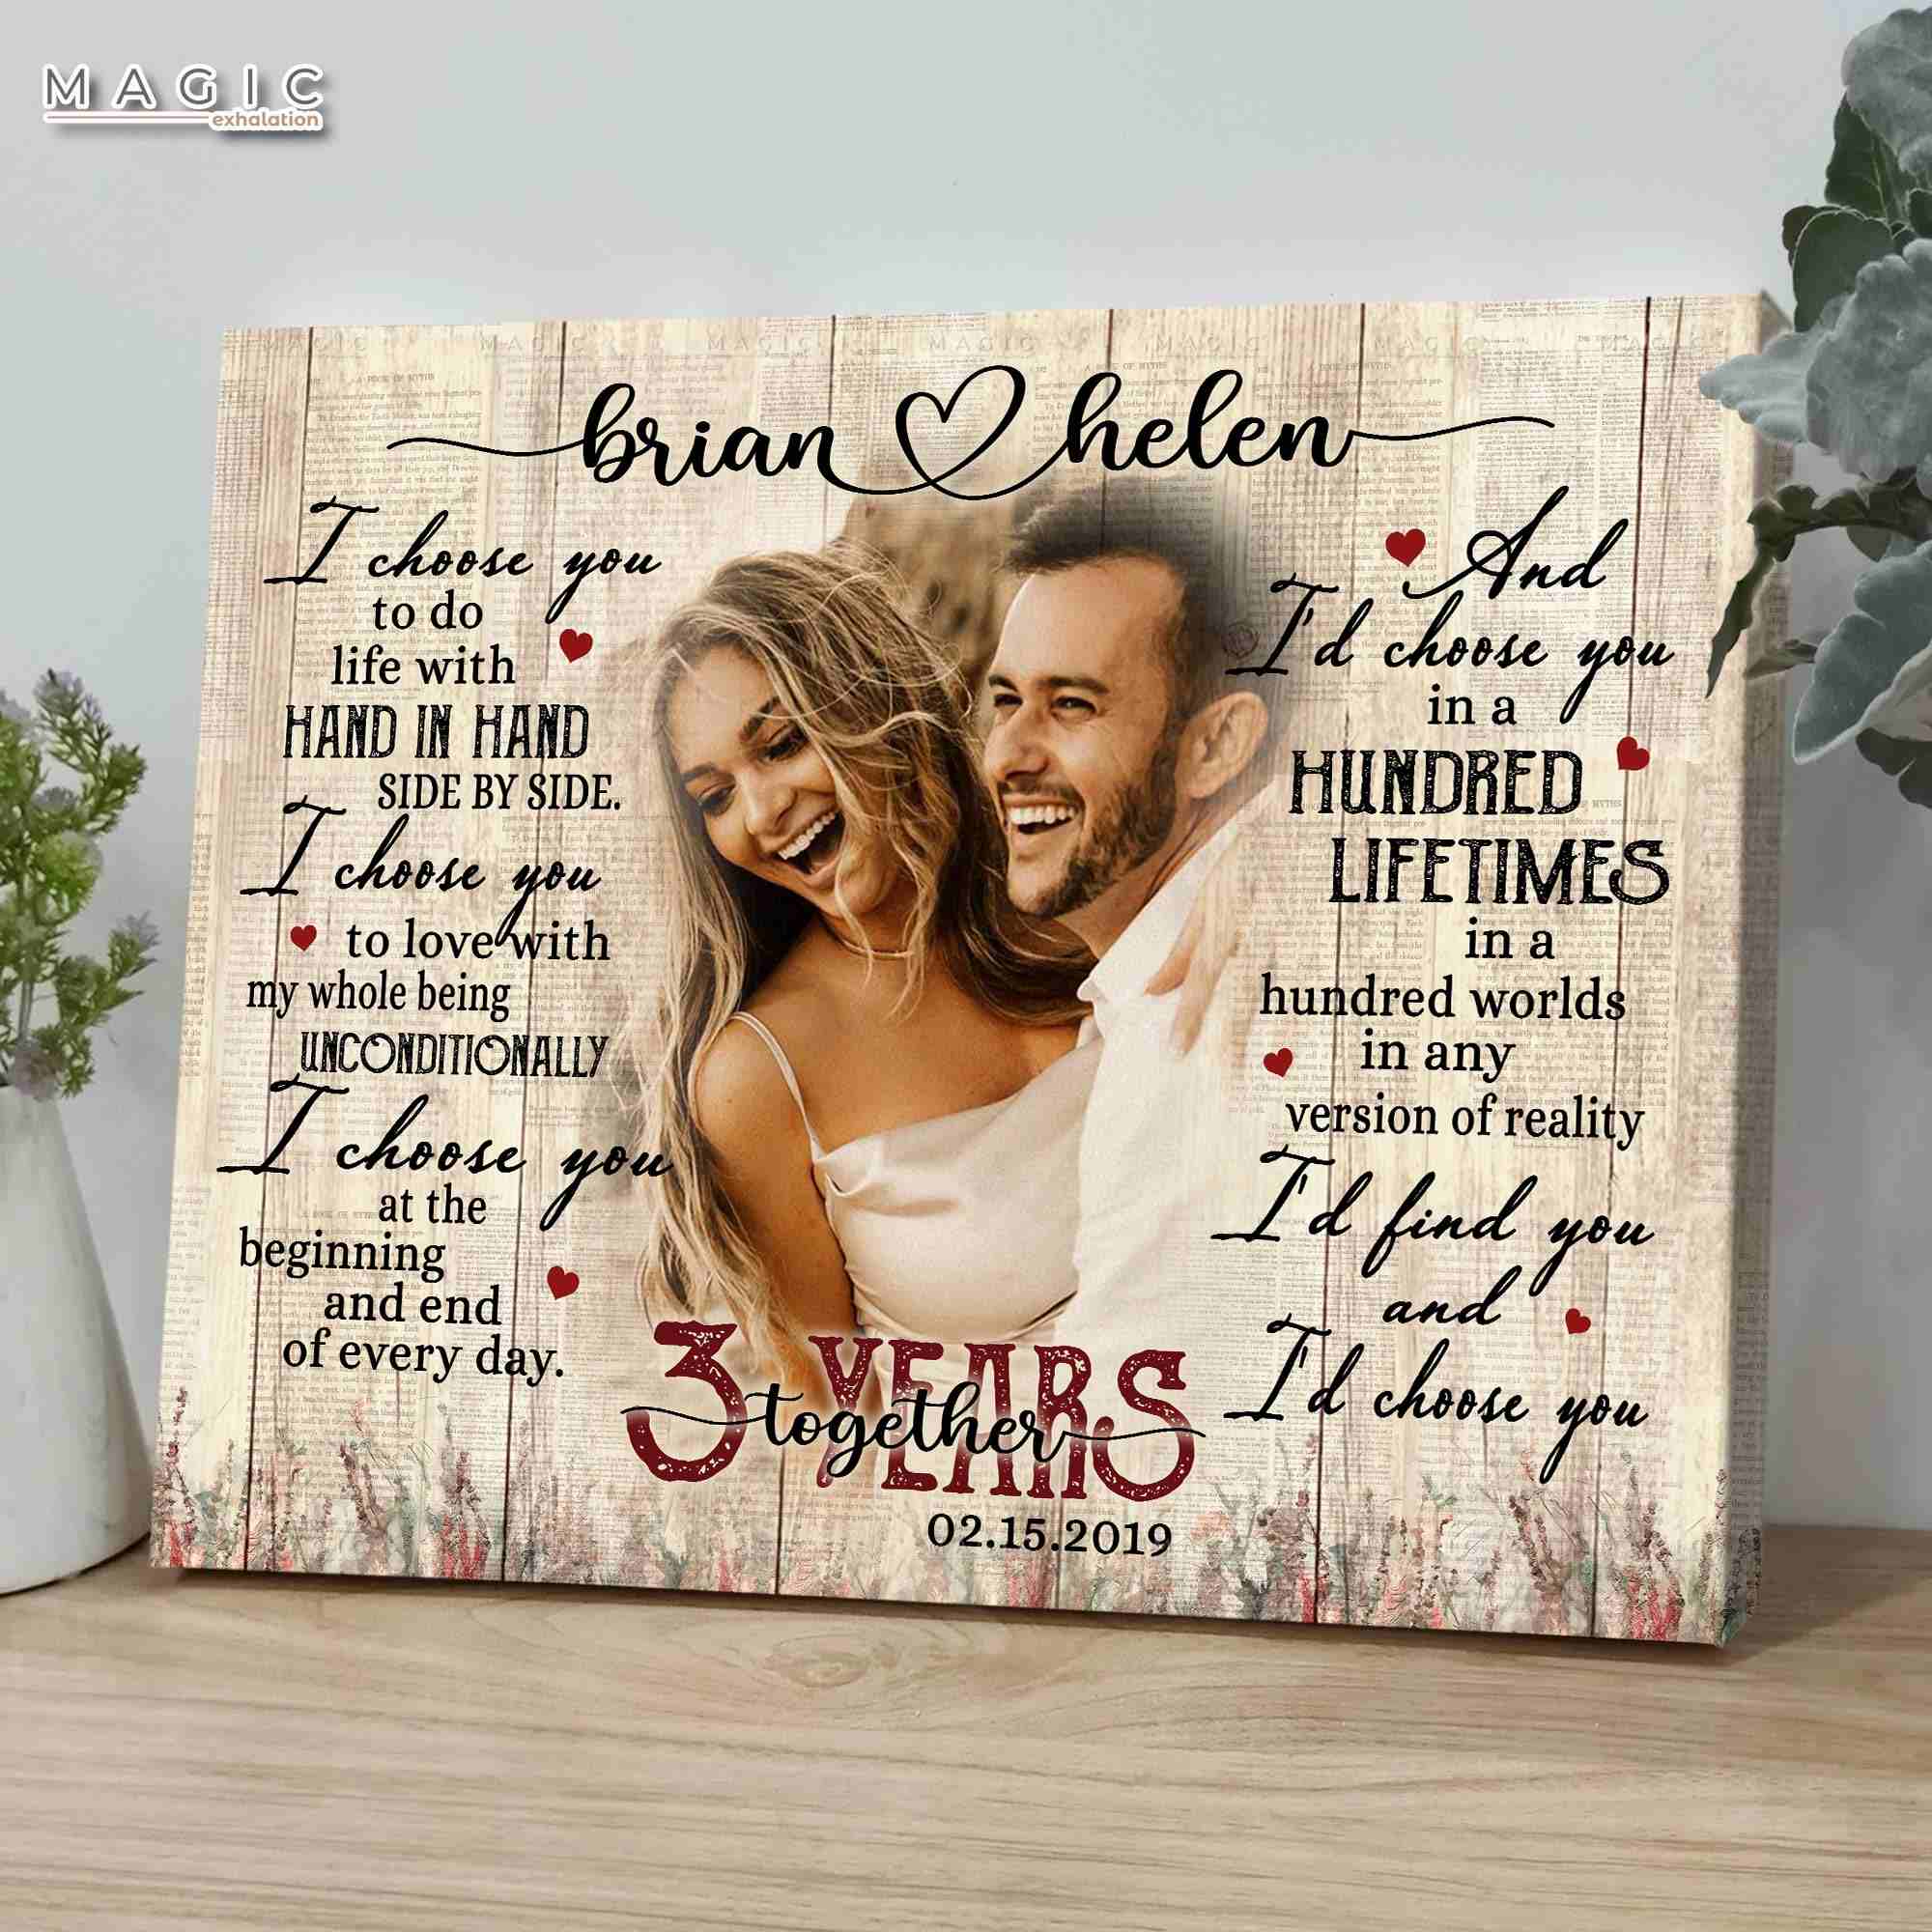 Reasons Why I Love You, One Year Dating Anniversary Gifts for Boyfriend,  1st Year 2nd Anniversary Gifts for Men, Romantic Gifts for Him - Etsy